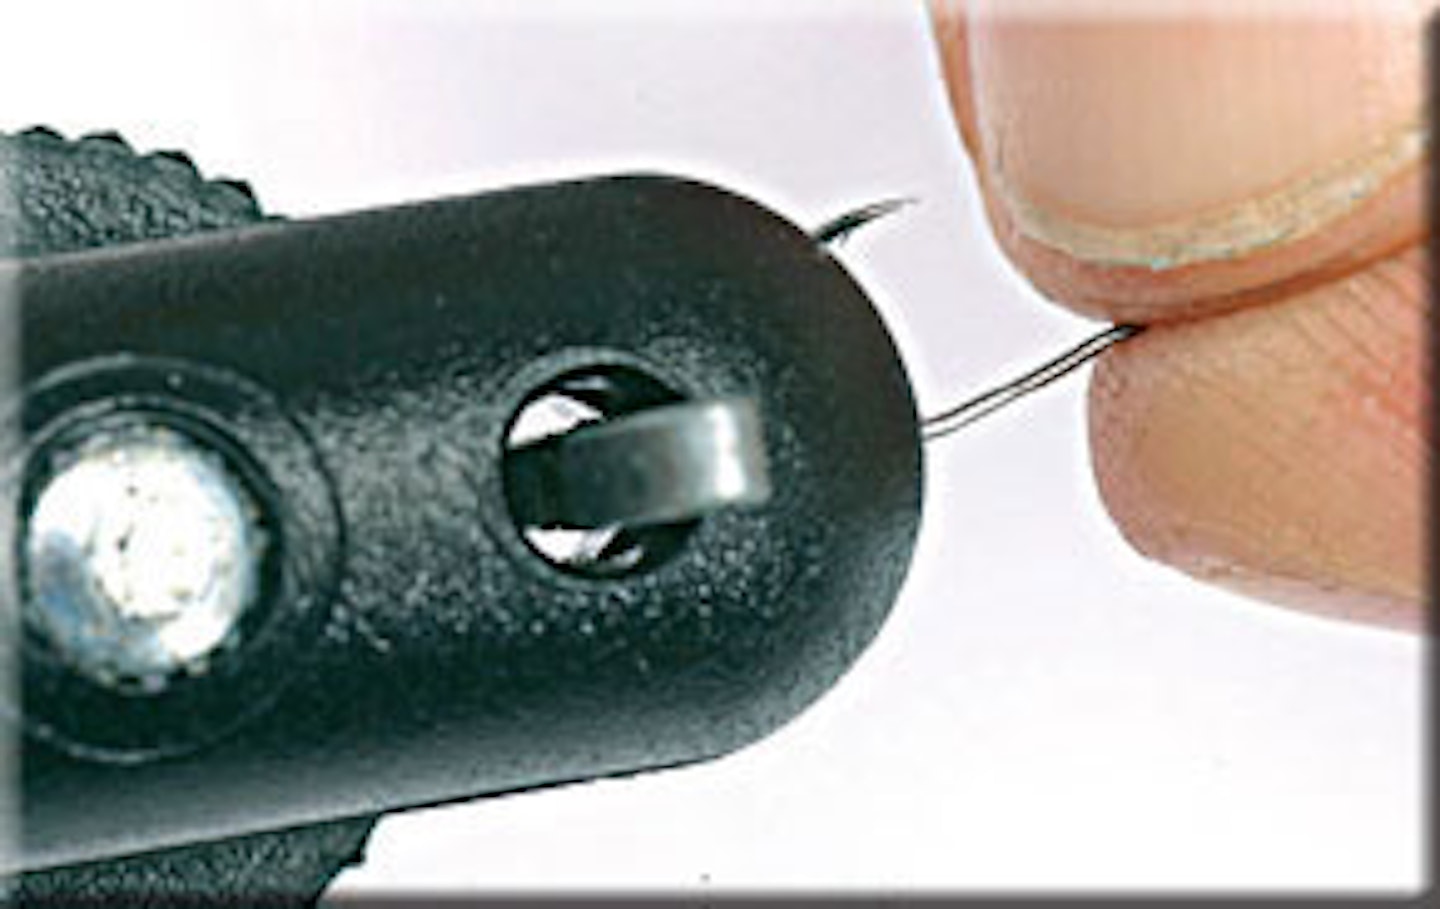 STEP ONE  Clamp the hook into the tyer by tightening the dial. Ensure the hook point isn’t showing as this can catch the line. 